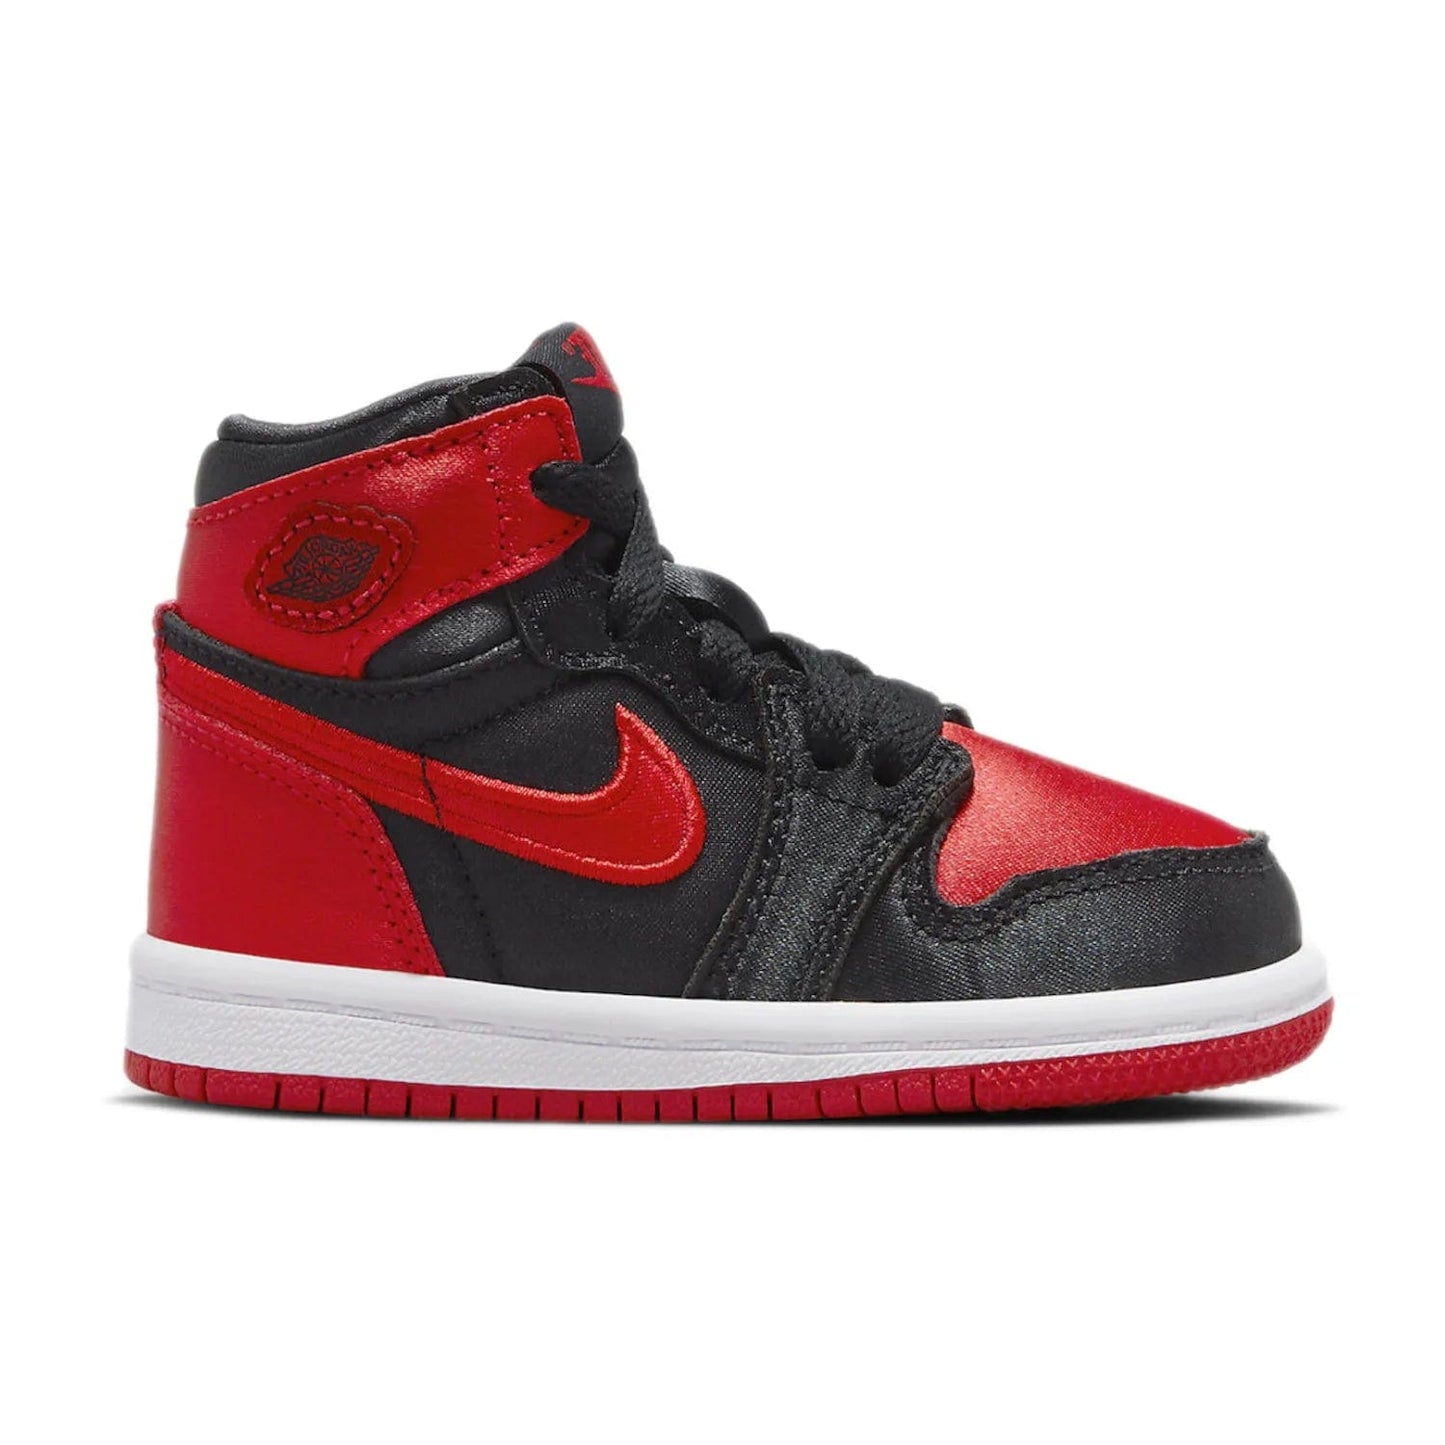 Jordan 1 Retro High OG Satin Bred (TD) - Image 1 - Only at www.BallersClubKickz.com - The Jordan 1 Retro High OG Satin Bred (TD) features a sleek black upper and bold University Red and White accents. The Satin material construction gives an elevated look. Get this must-have Jordan 1 when it releases in 2023.